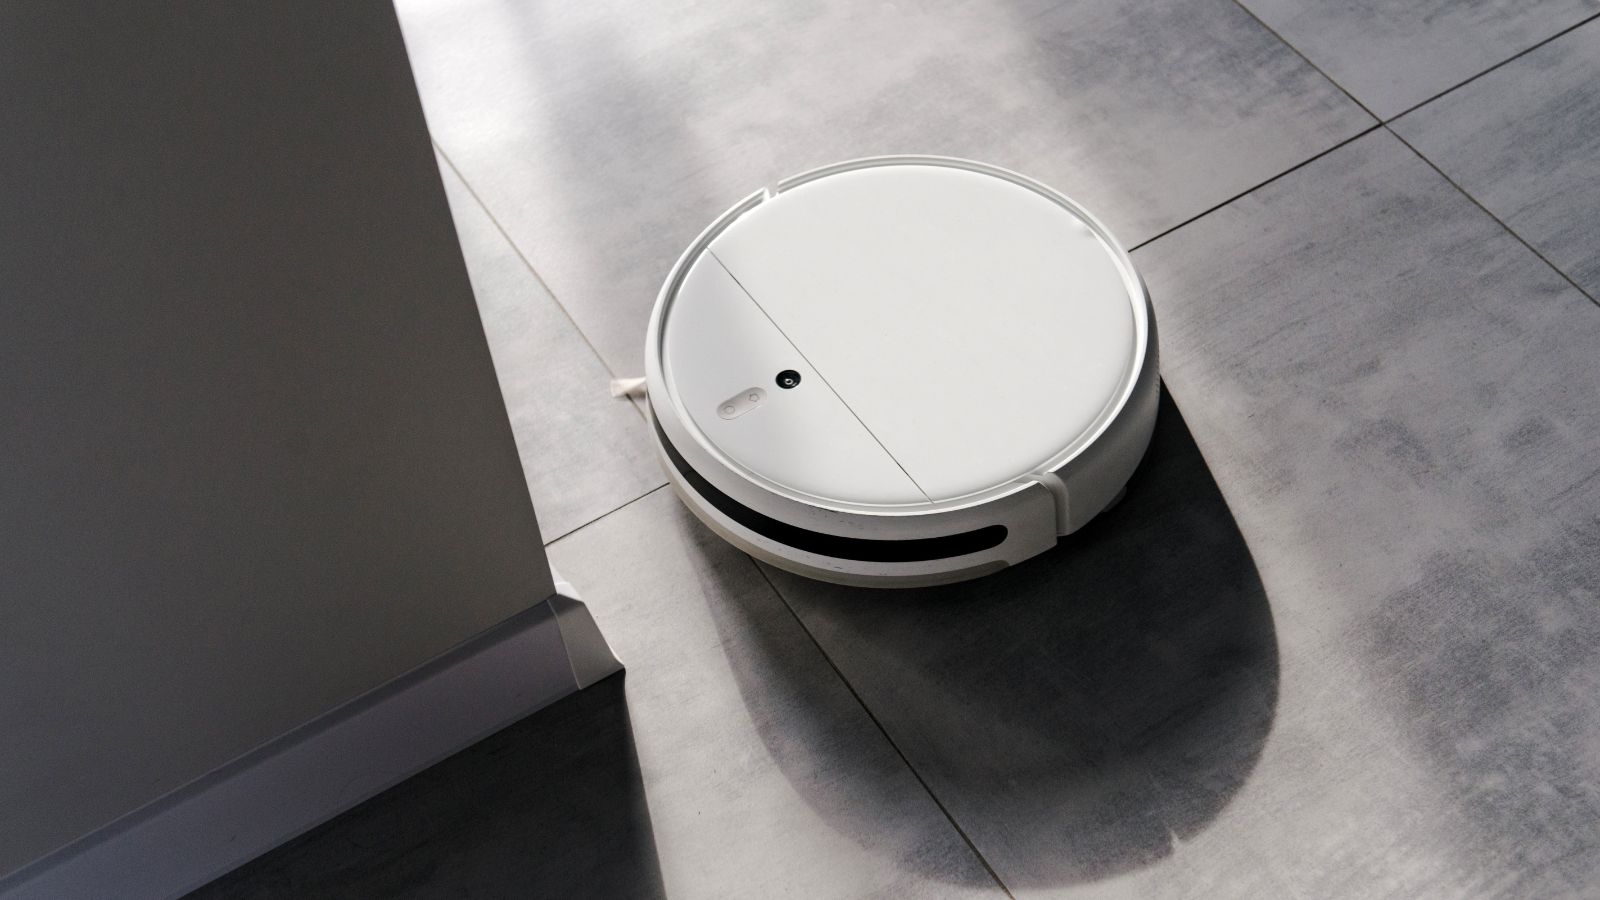 Are robot vacuums really worth it Cleaning experts weigh in on the pros and cons